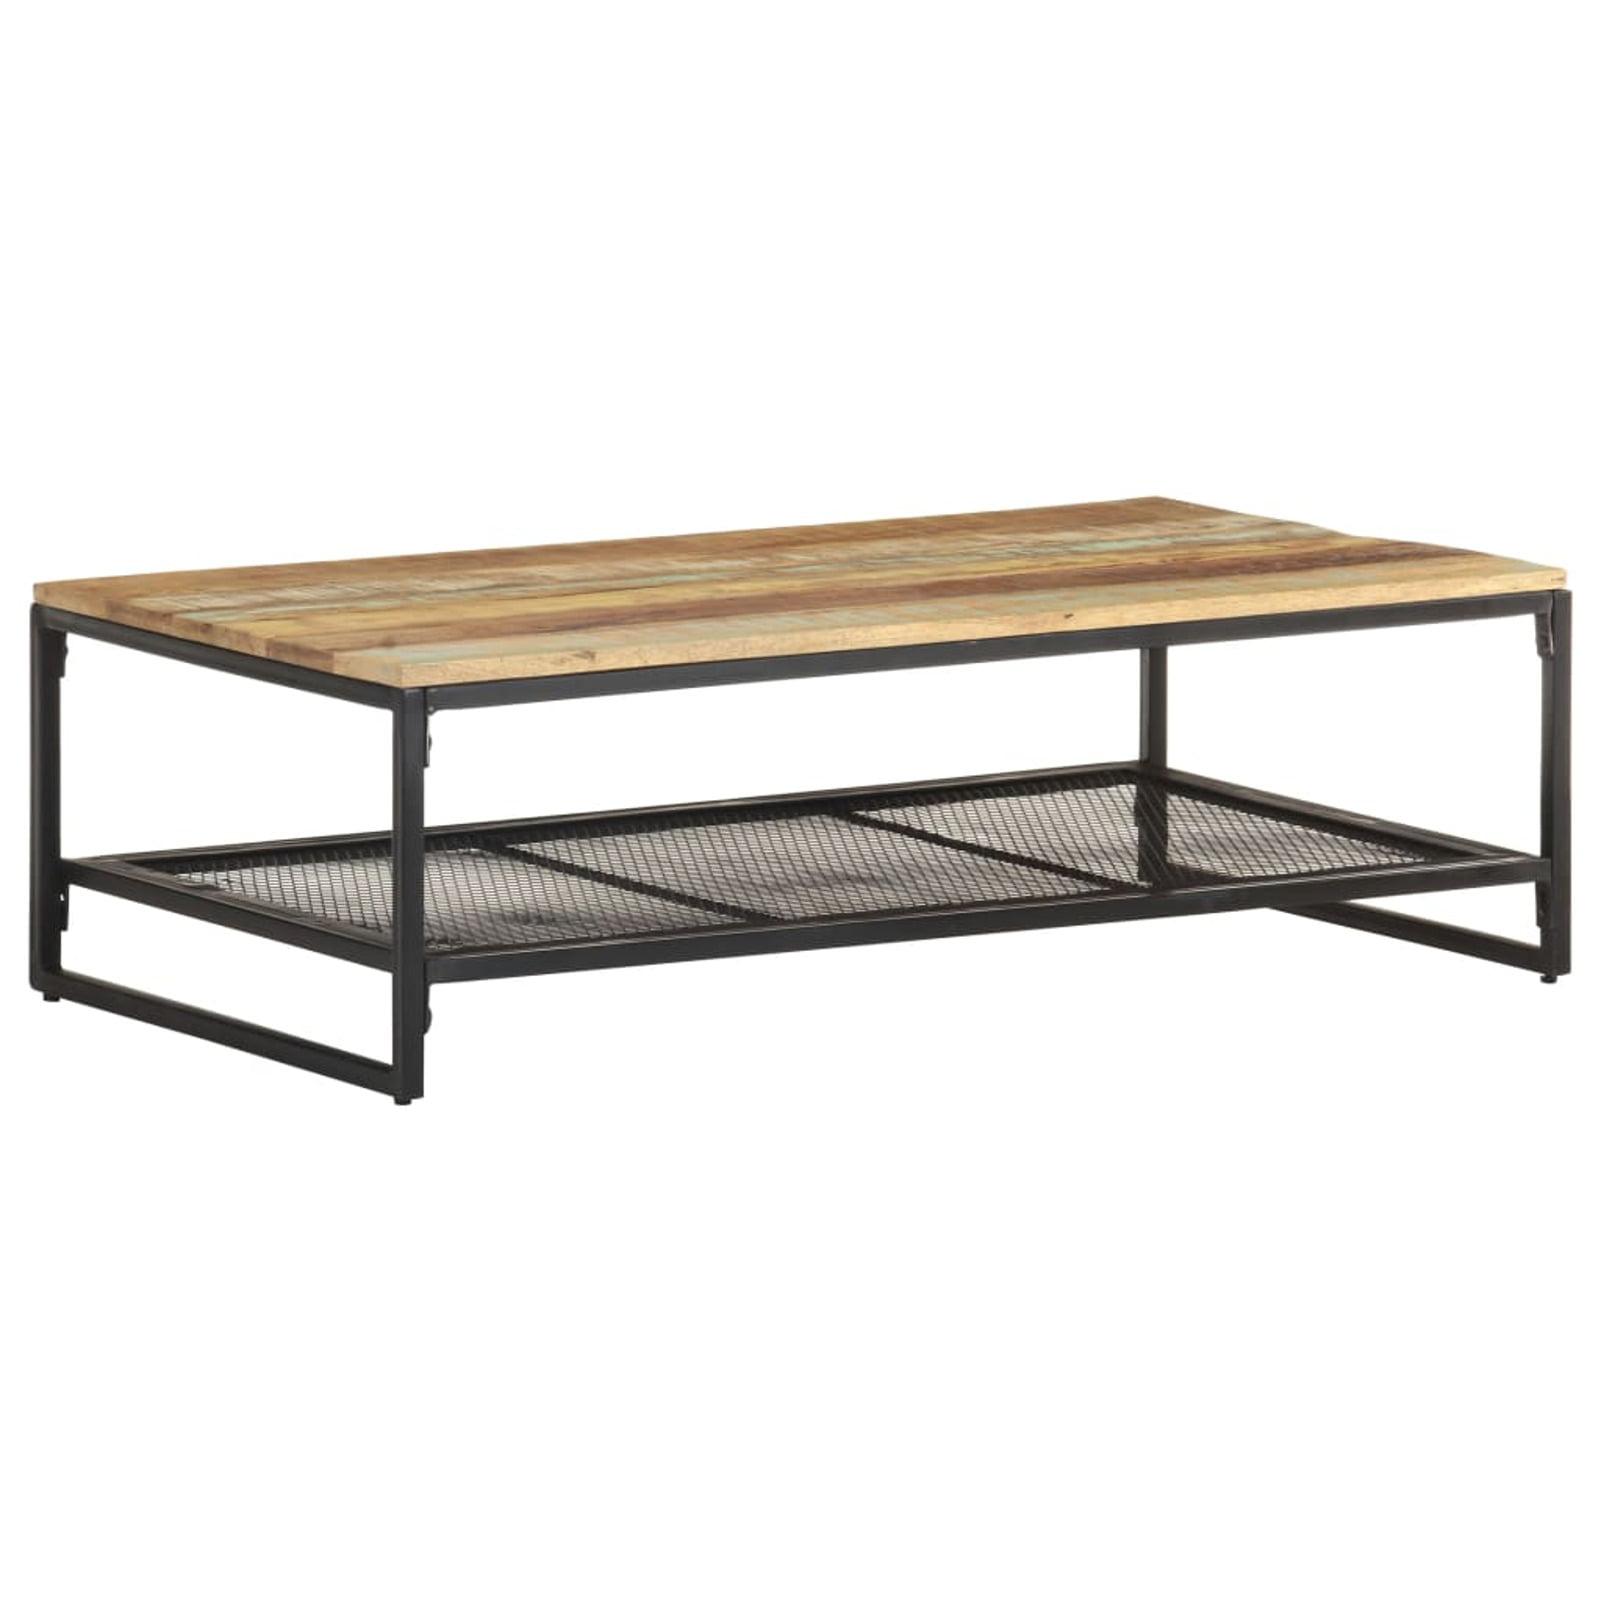 Rustic Reclaimed Wood and Iron 43" Coffee Table with Shelf